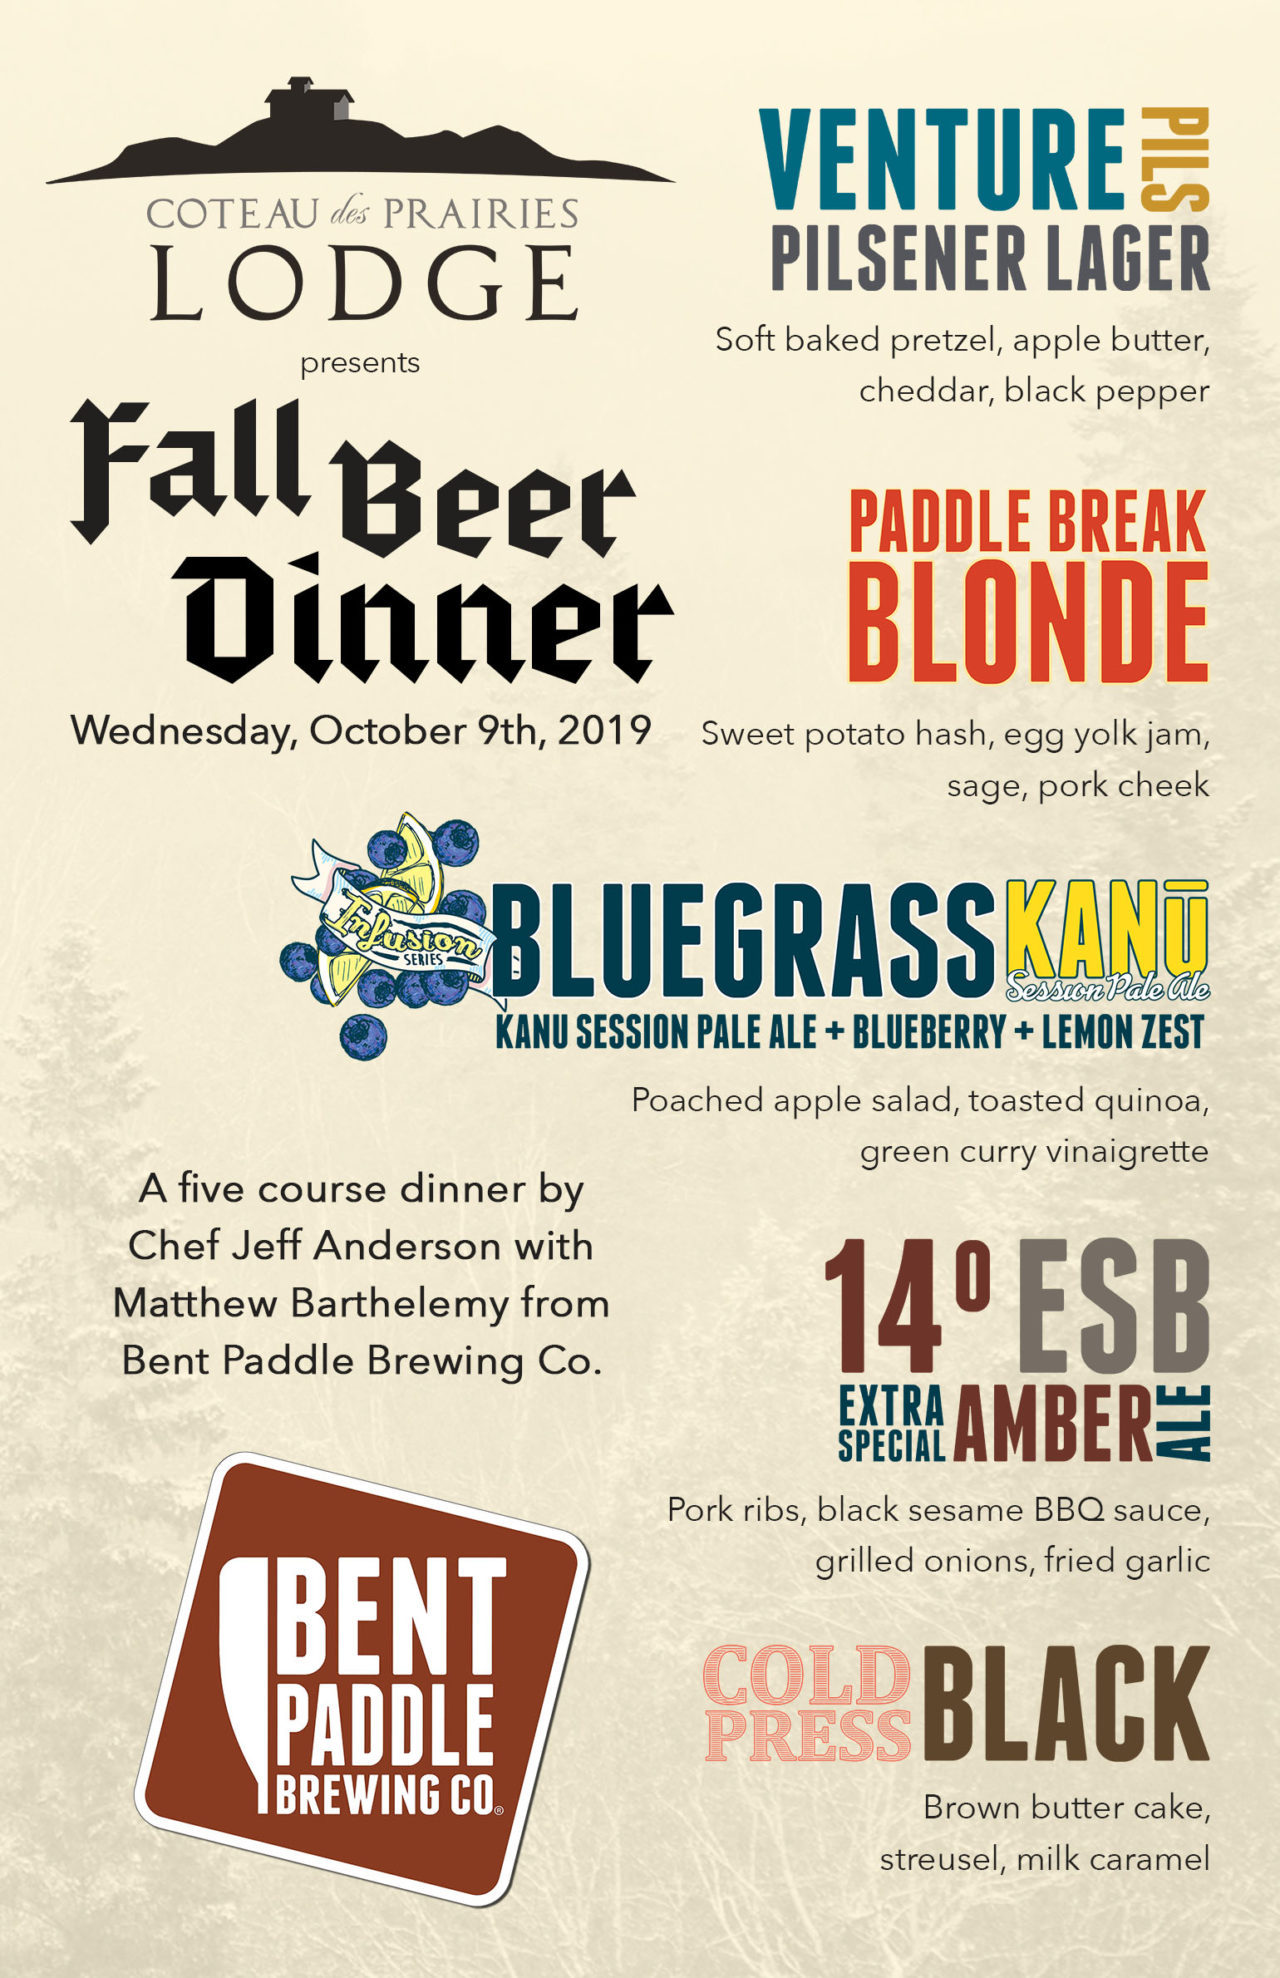 Fall Beer Dinner – Wednesday, October 9th | Coteau des Prairies Lodge